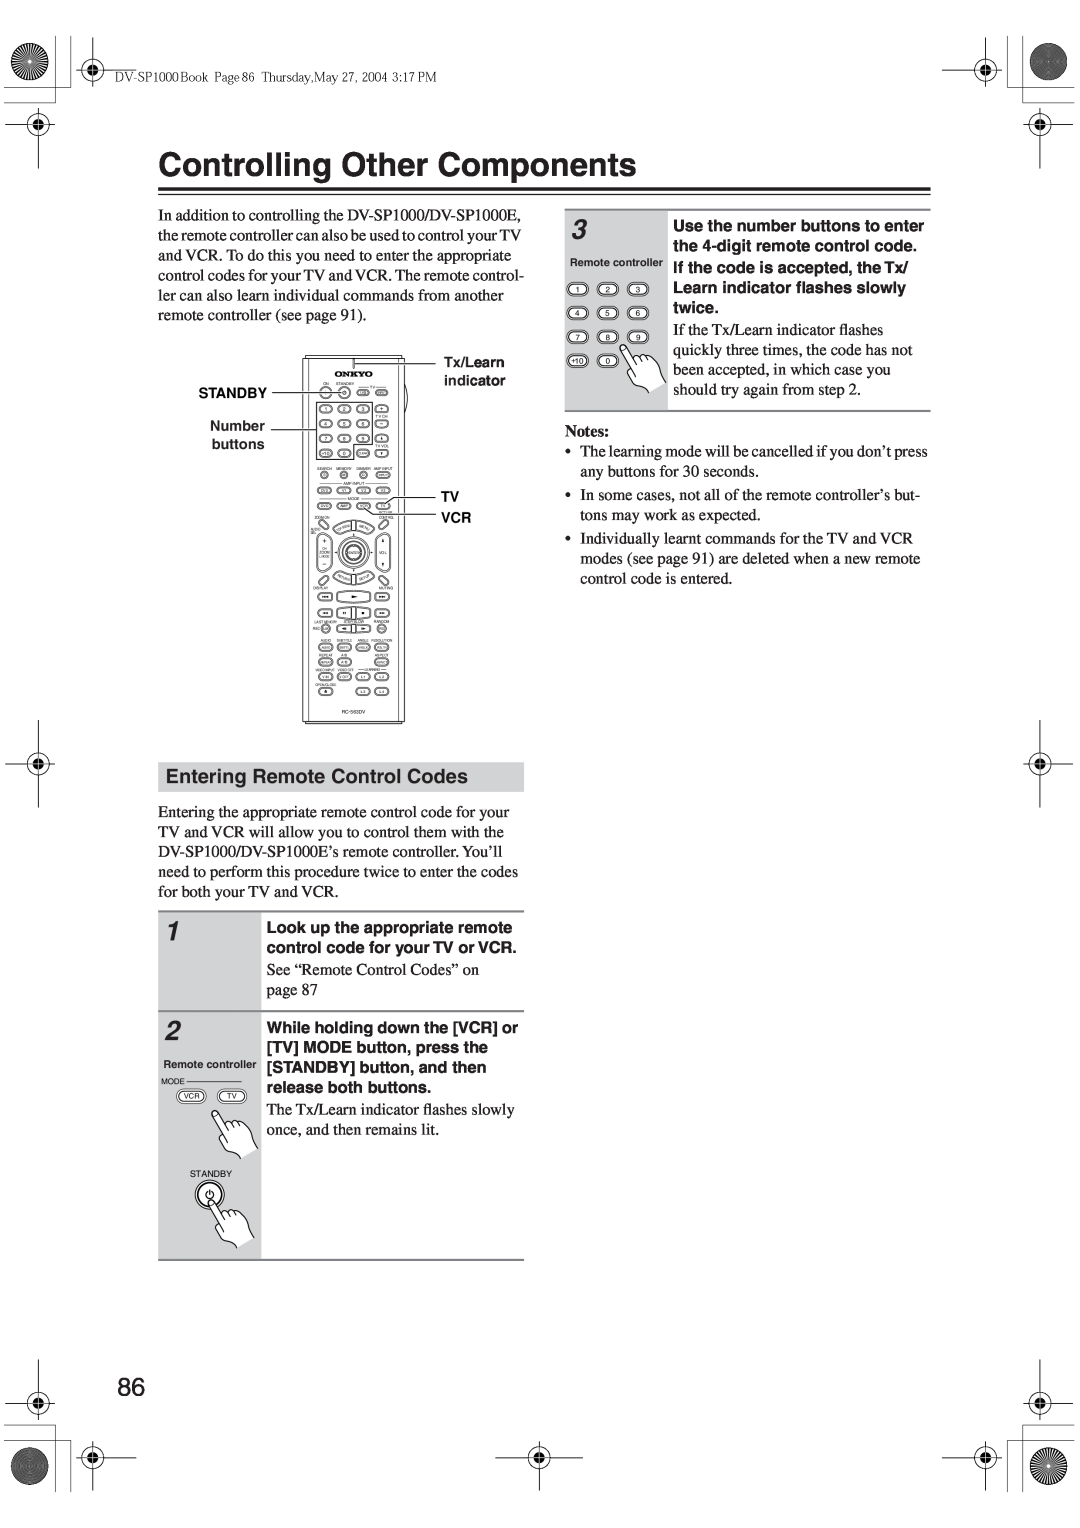 Onkyo DV-SP1000E Controlling Other Components, Entering Remote Control Codes, See “Remote Control Codes” on, page, Notes 